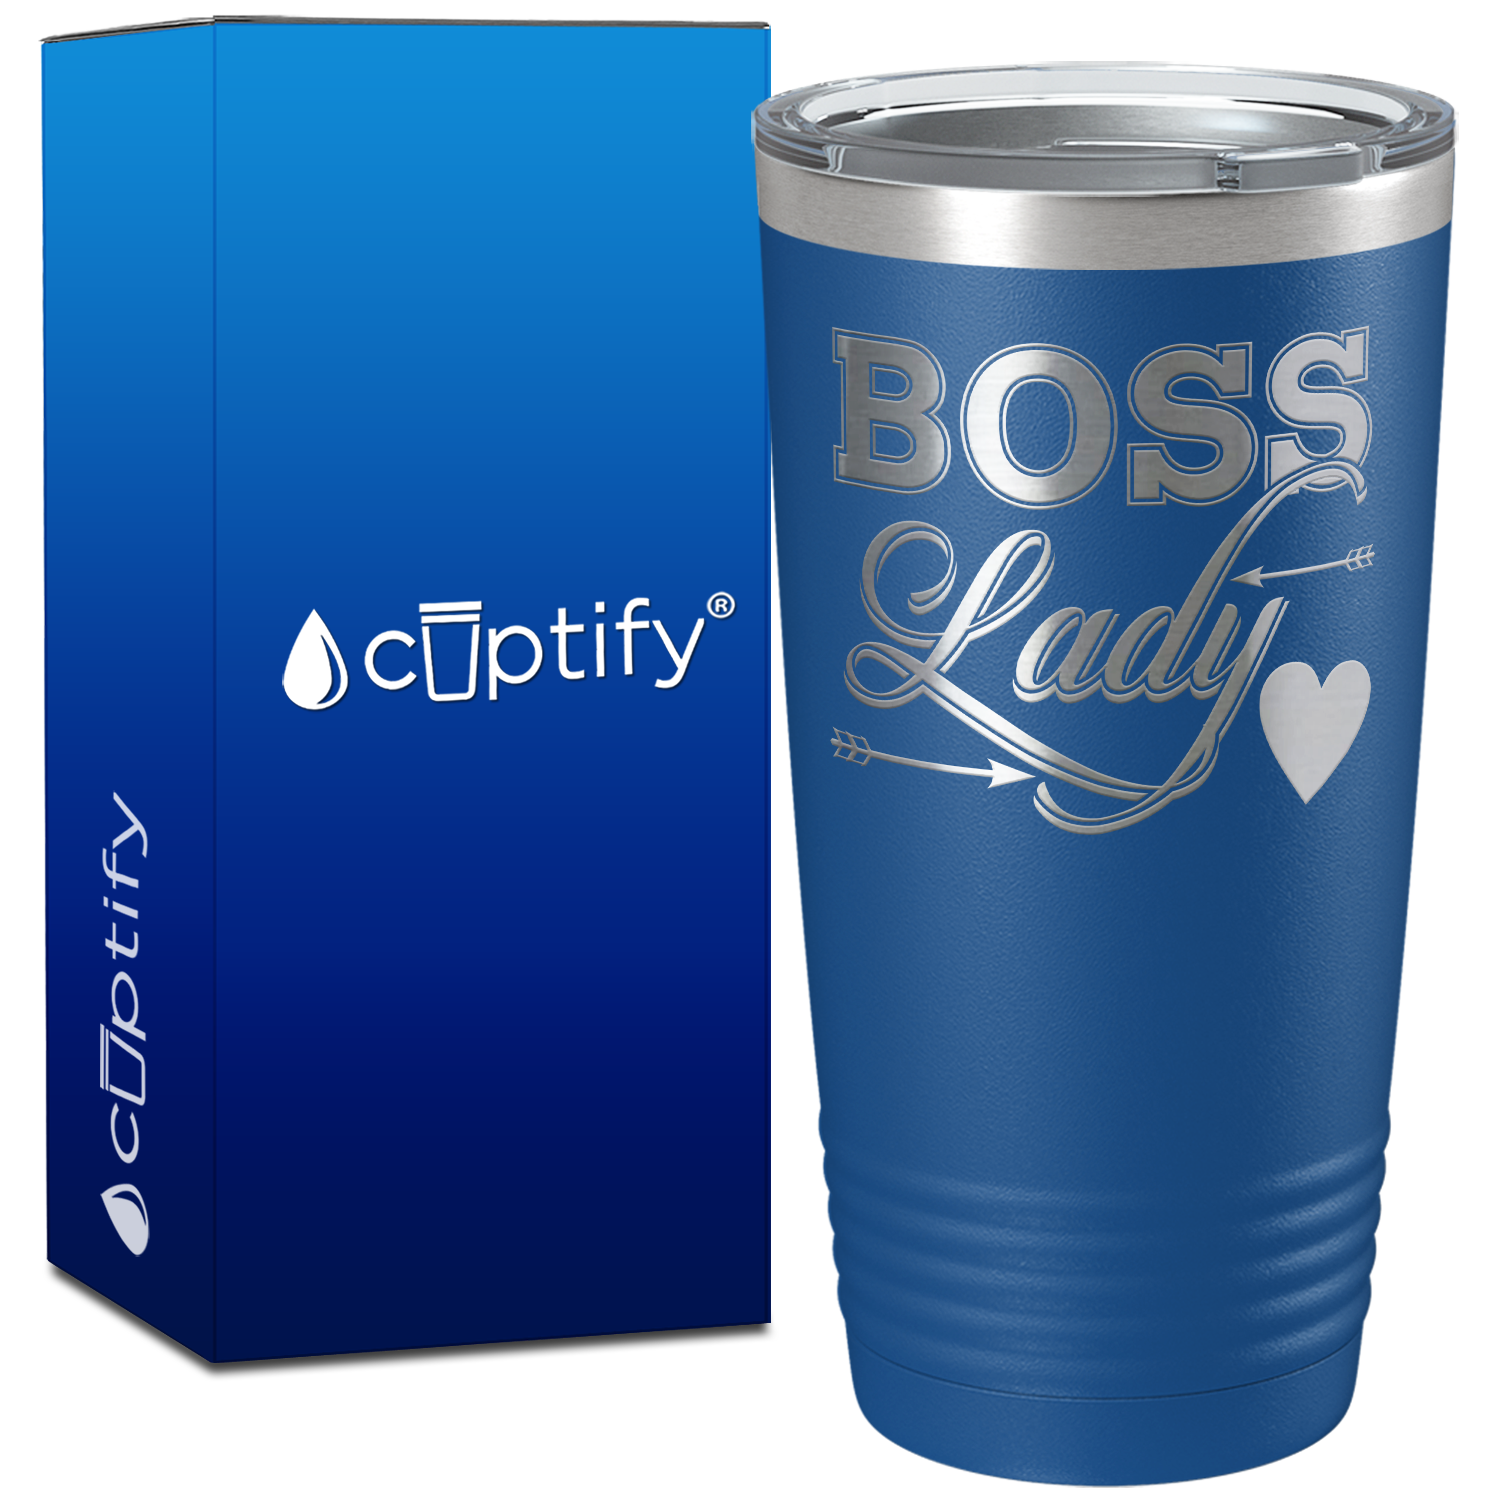 Boss Lady Heart and Arrows on 20oz Tumbler